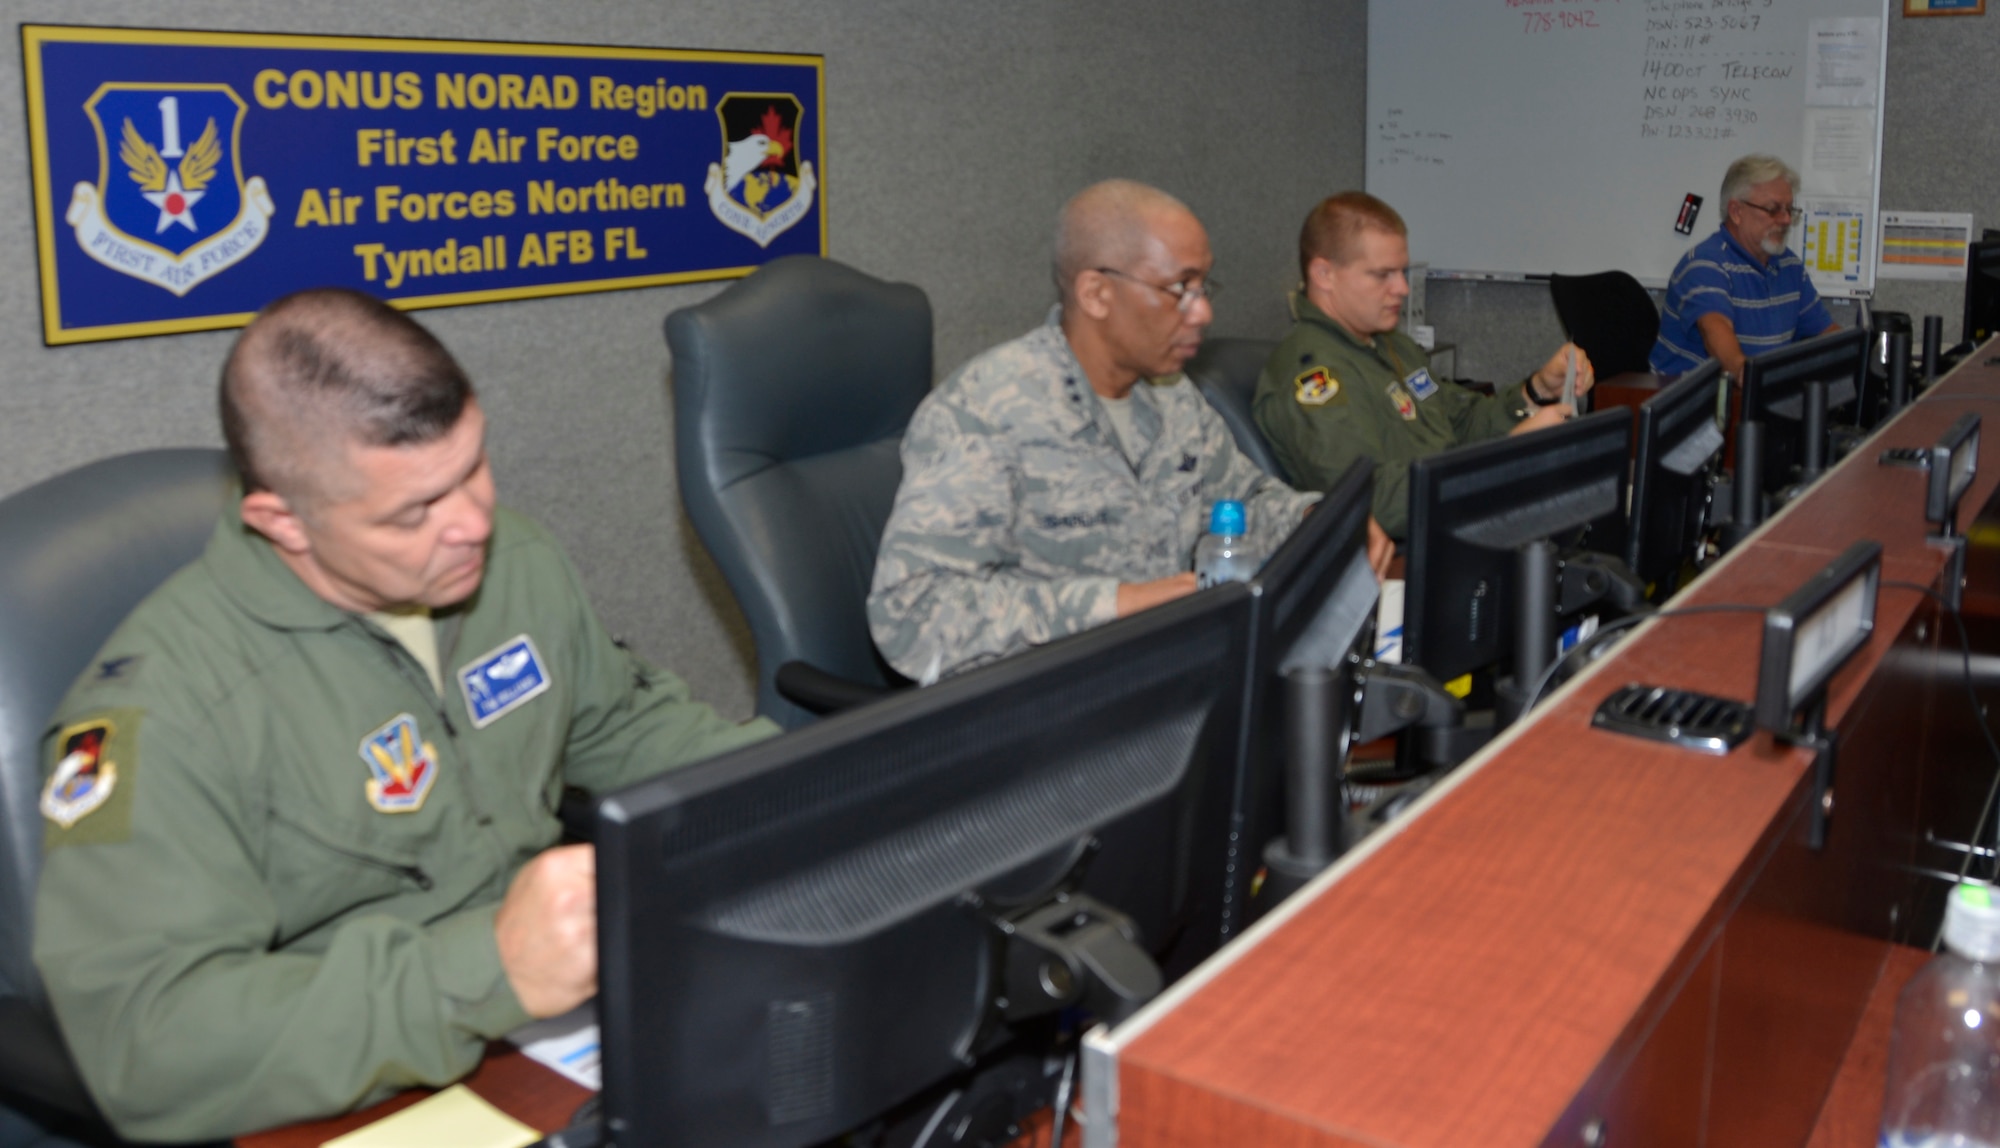 TYNDALL AIR FORCE BASE, Fla. - Maj. Gen. Leonard Isabelle Jr., (right) Air Forces Northern Joint Forces Air Component commander for  Ardent Sentry 18, a hurricane-response preparation exercise, readies for the morning briefing via teleconference here May 9. Beside him is Col. Timothy Williams, deputy director, AFNORTH Operations Directorate. (Air Force photo by Mary McHale)